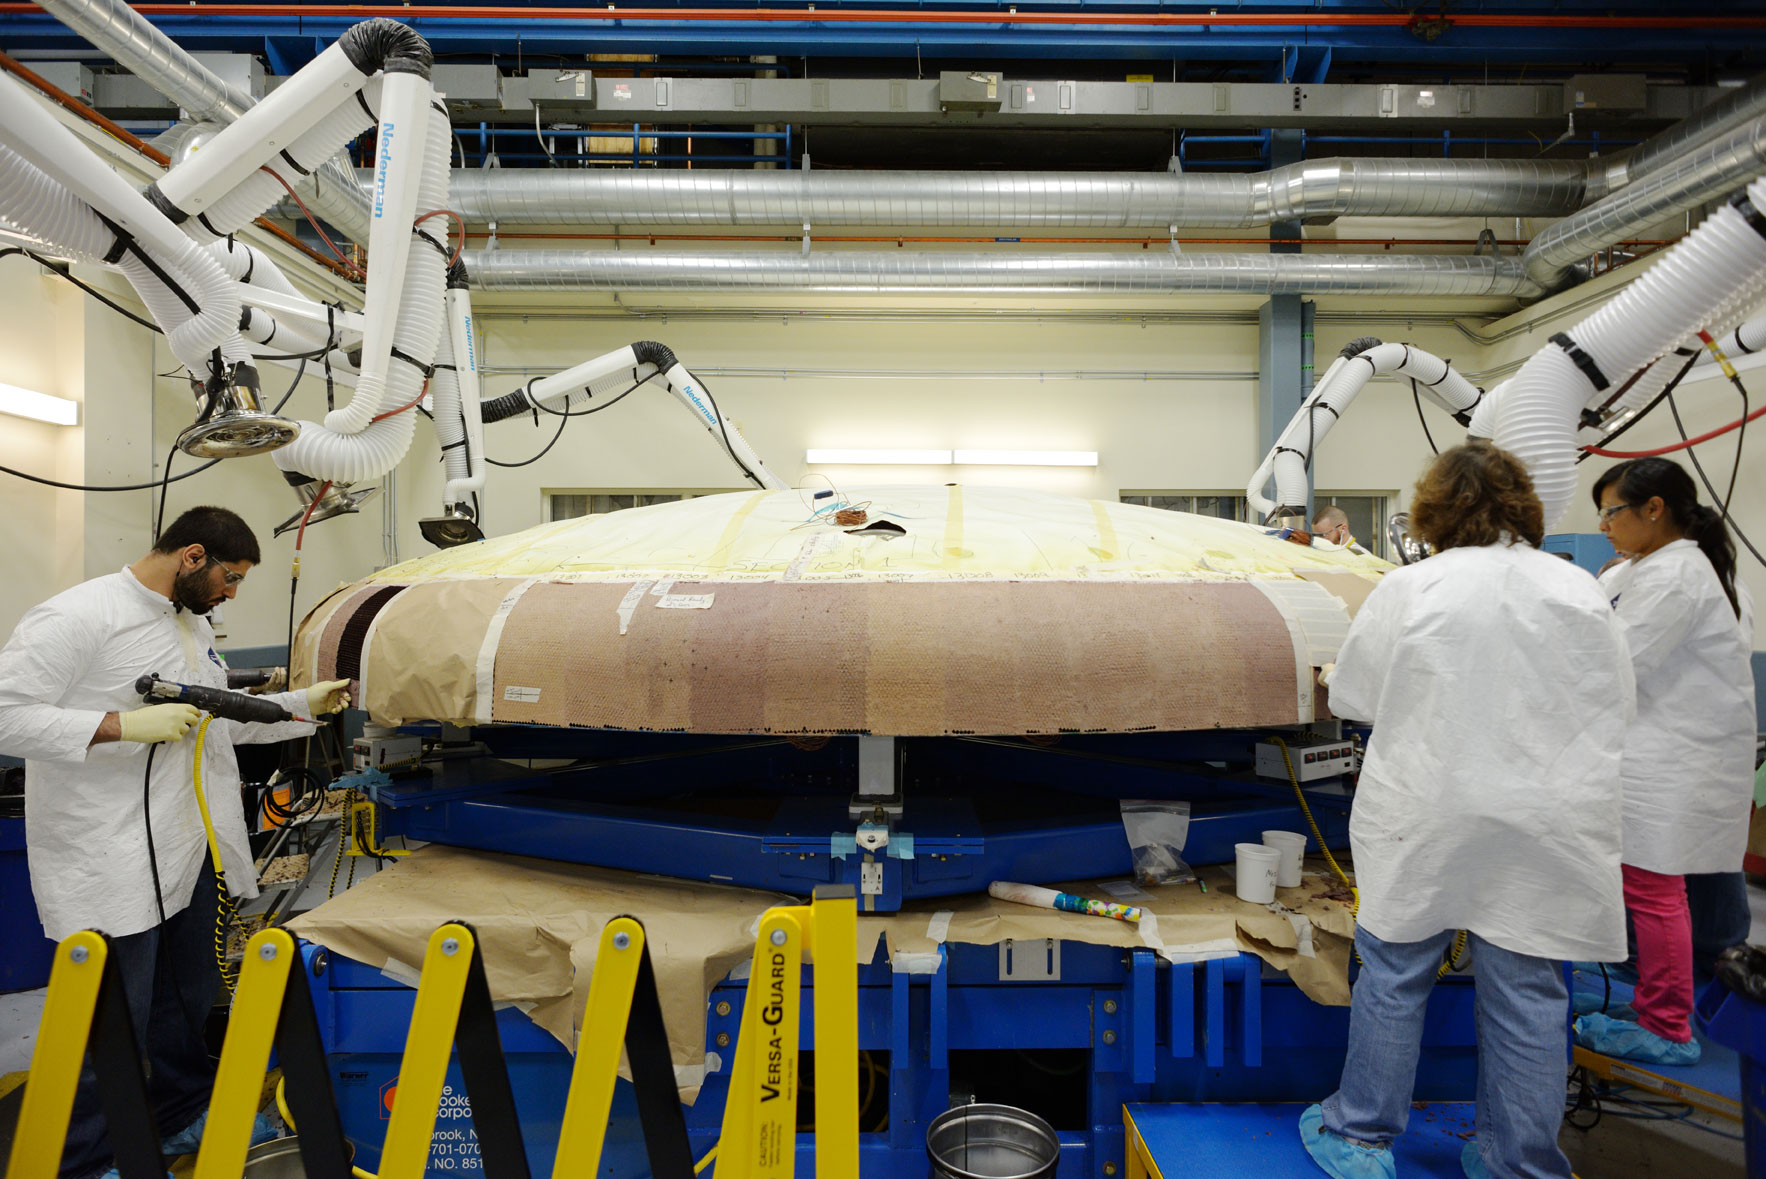 A team of technicians at Textron Defense Systems apply Avcoat ablative material to the composite honeycomb structure attached to the Orion heat shield carrier structure. The ablative material is designed to protect the spacecraft from extreme temperatures during re-entry. Image Credit: NASA